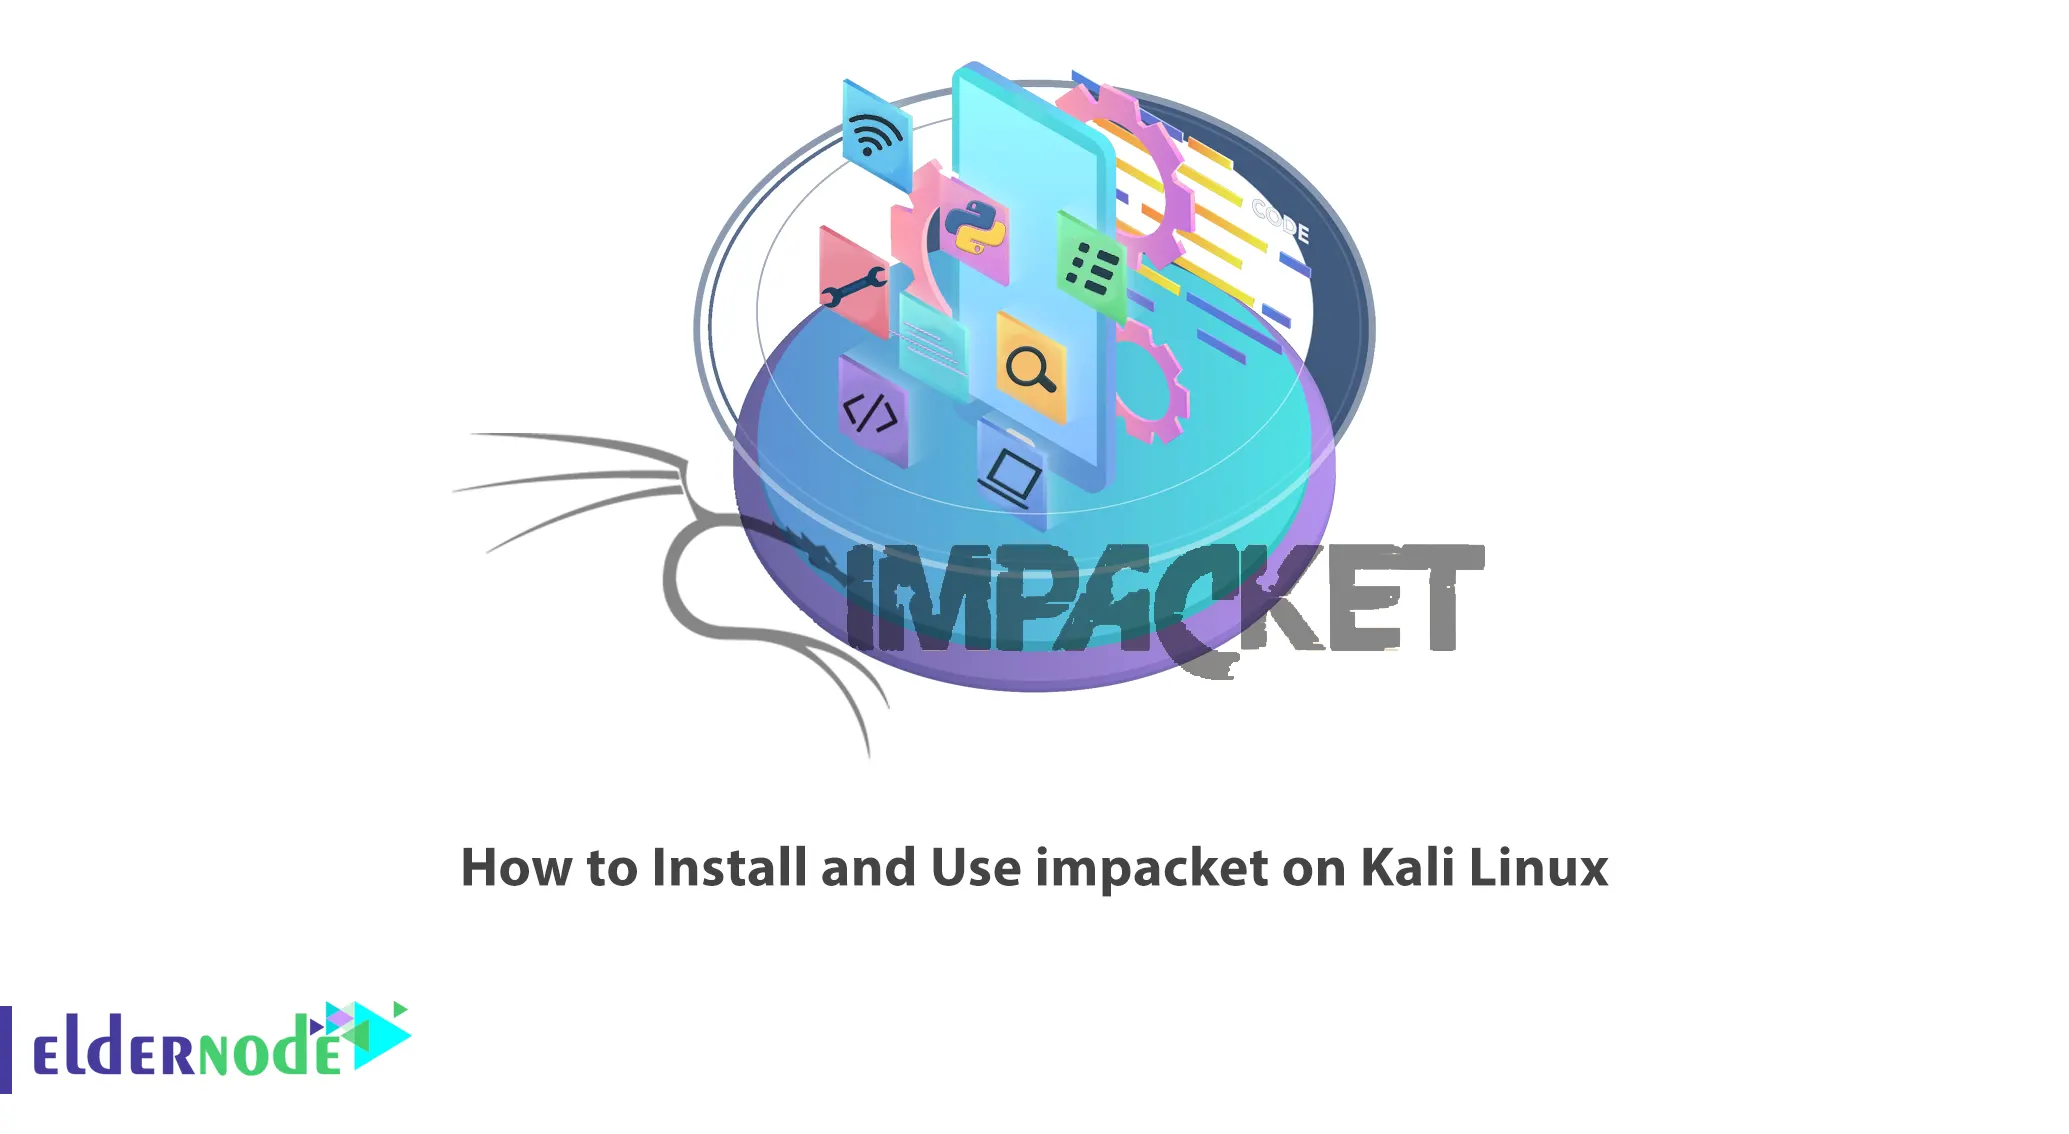 How to Install and Use impacket on Kali Linux